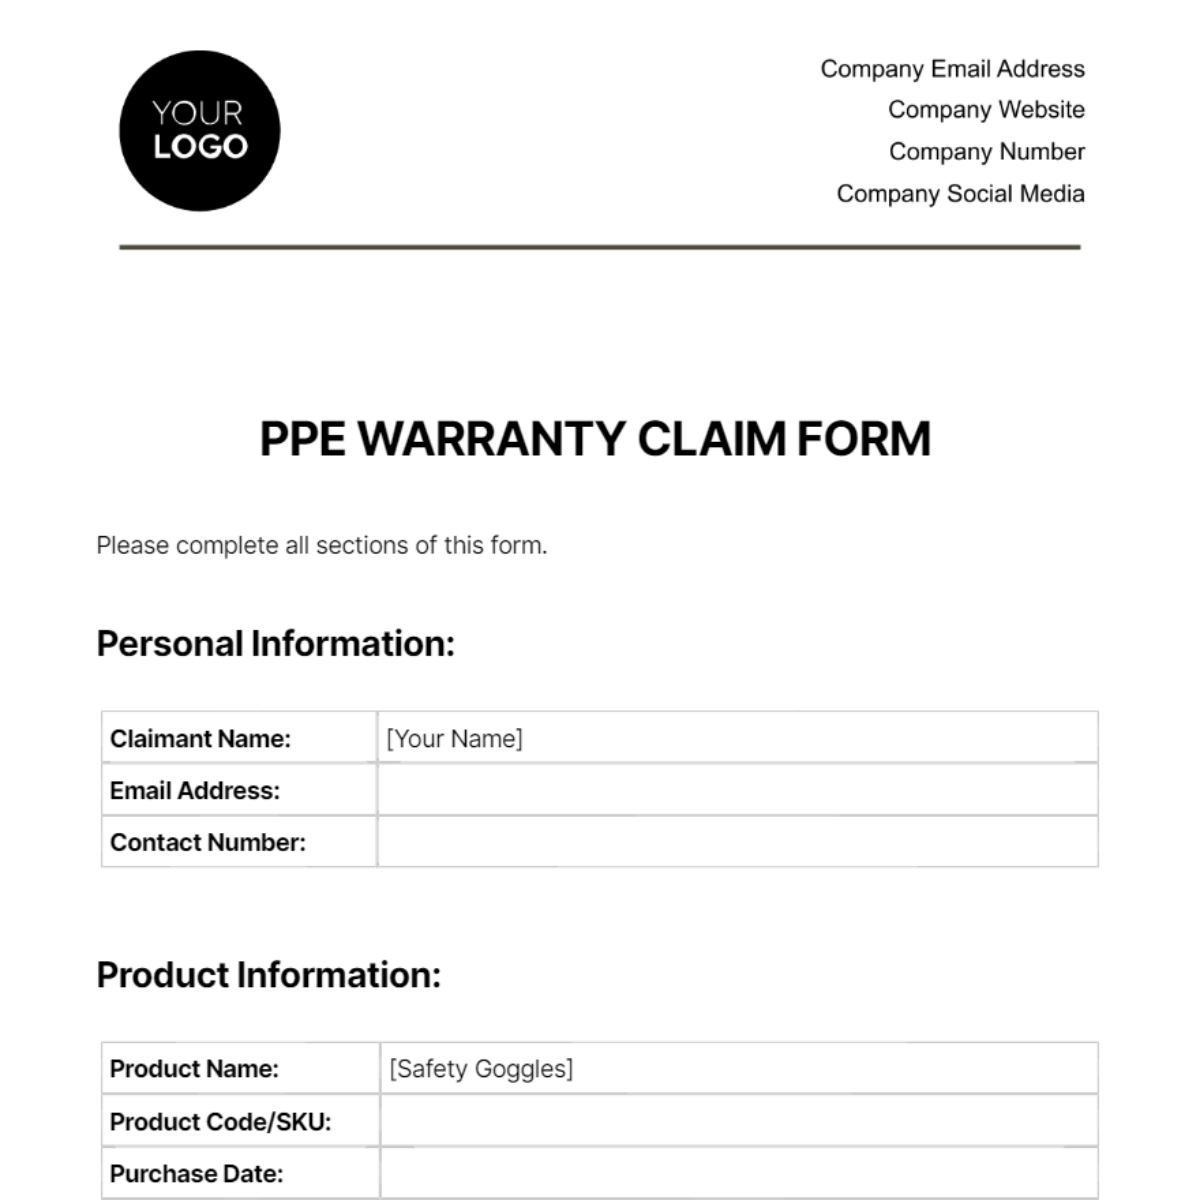 Free PPE Warranty Claim Form Template